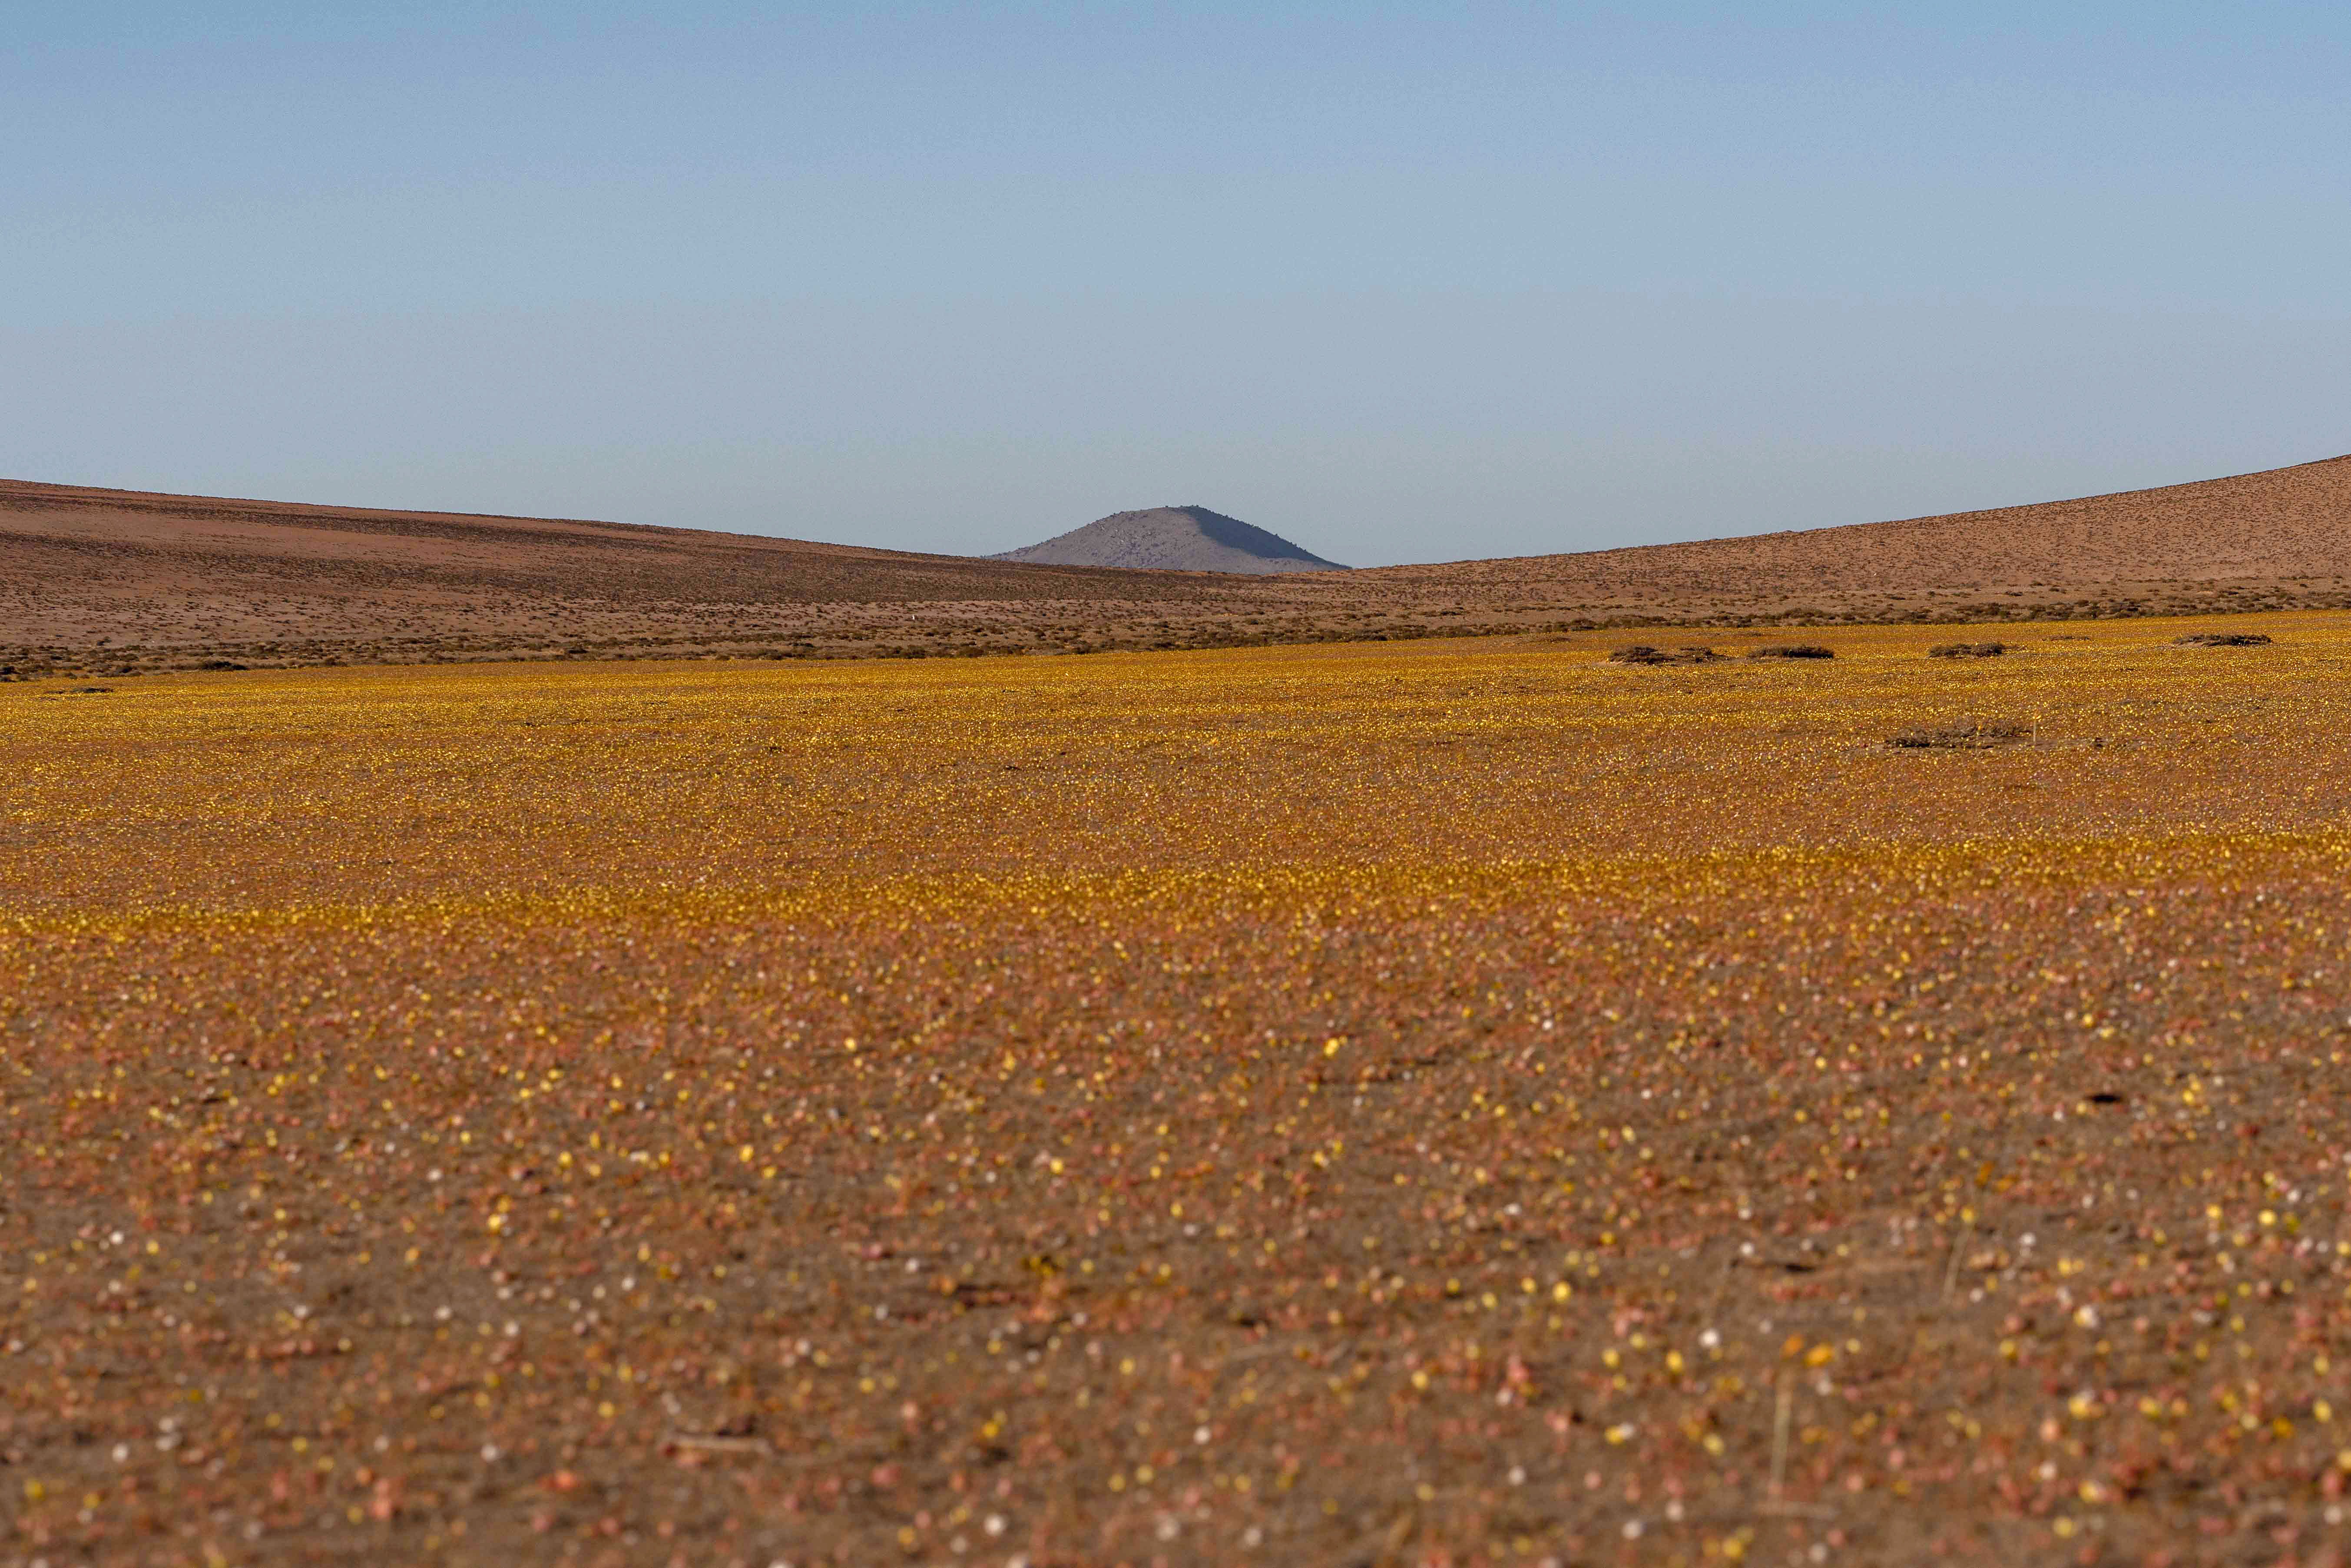 A blanket of flowers on the desert floor in the Atacama in Copiapo, Chile. (Photo: Alex Fuentes, Getty Images)